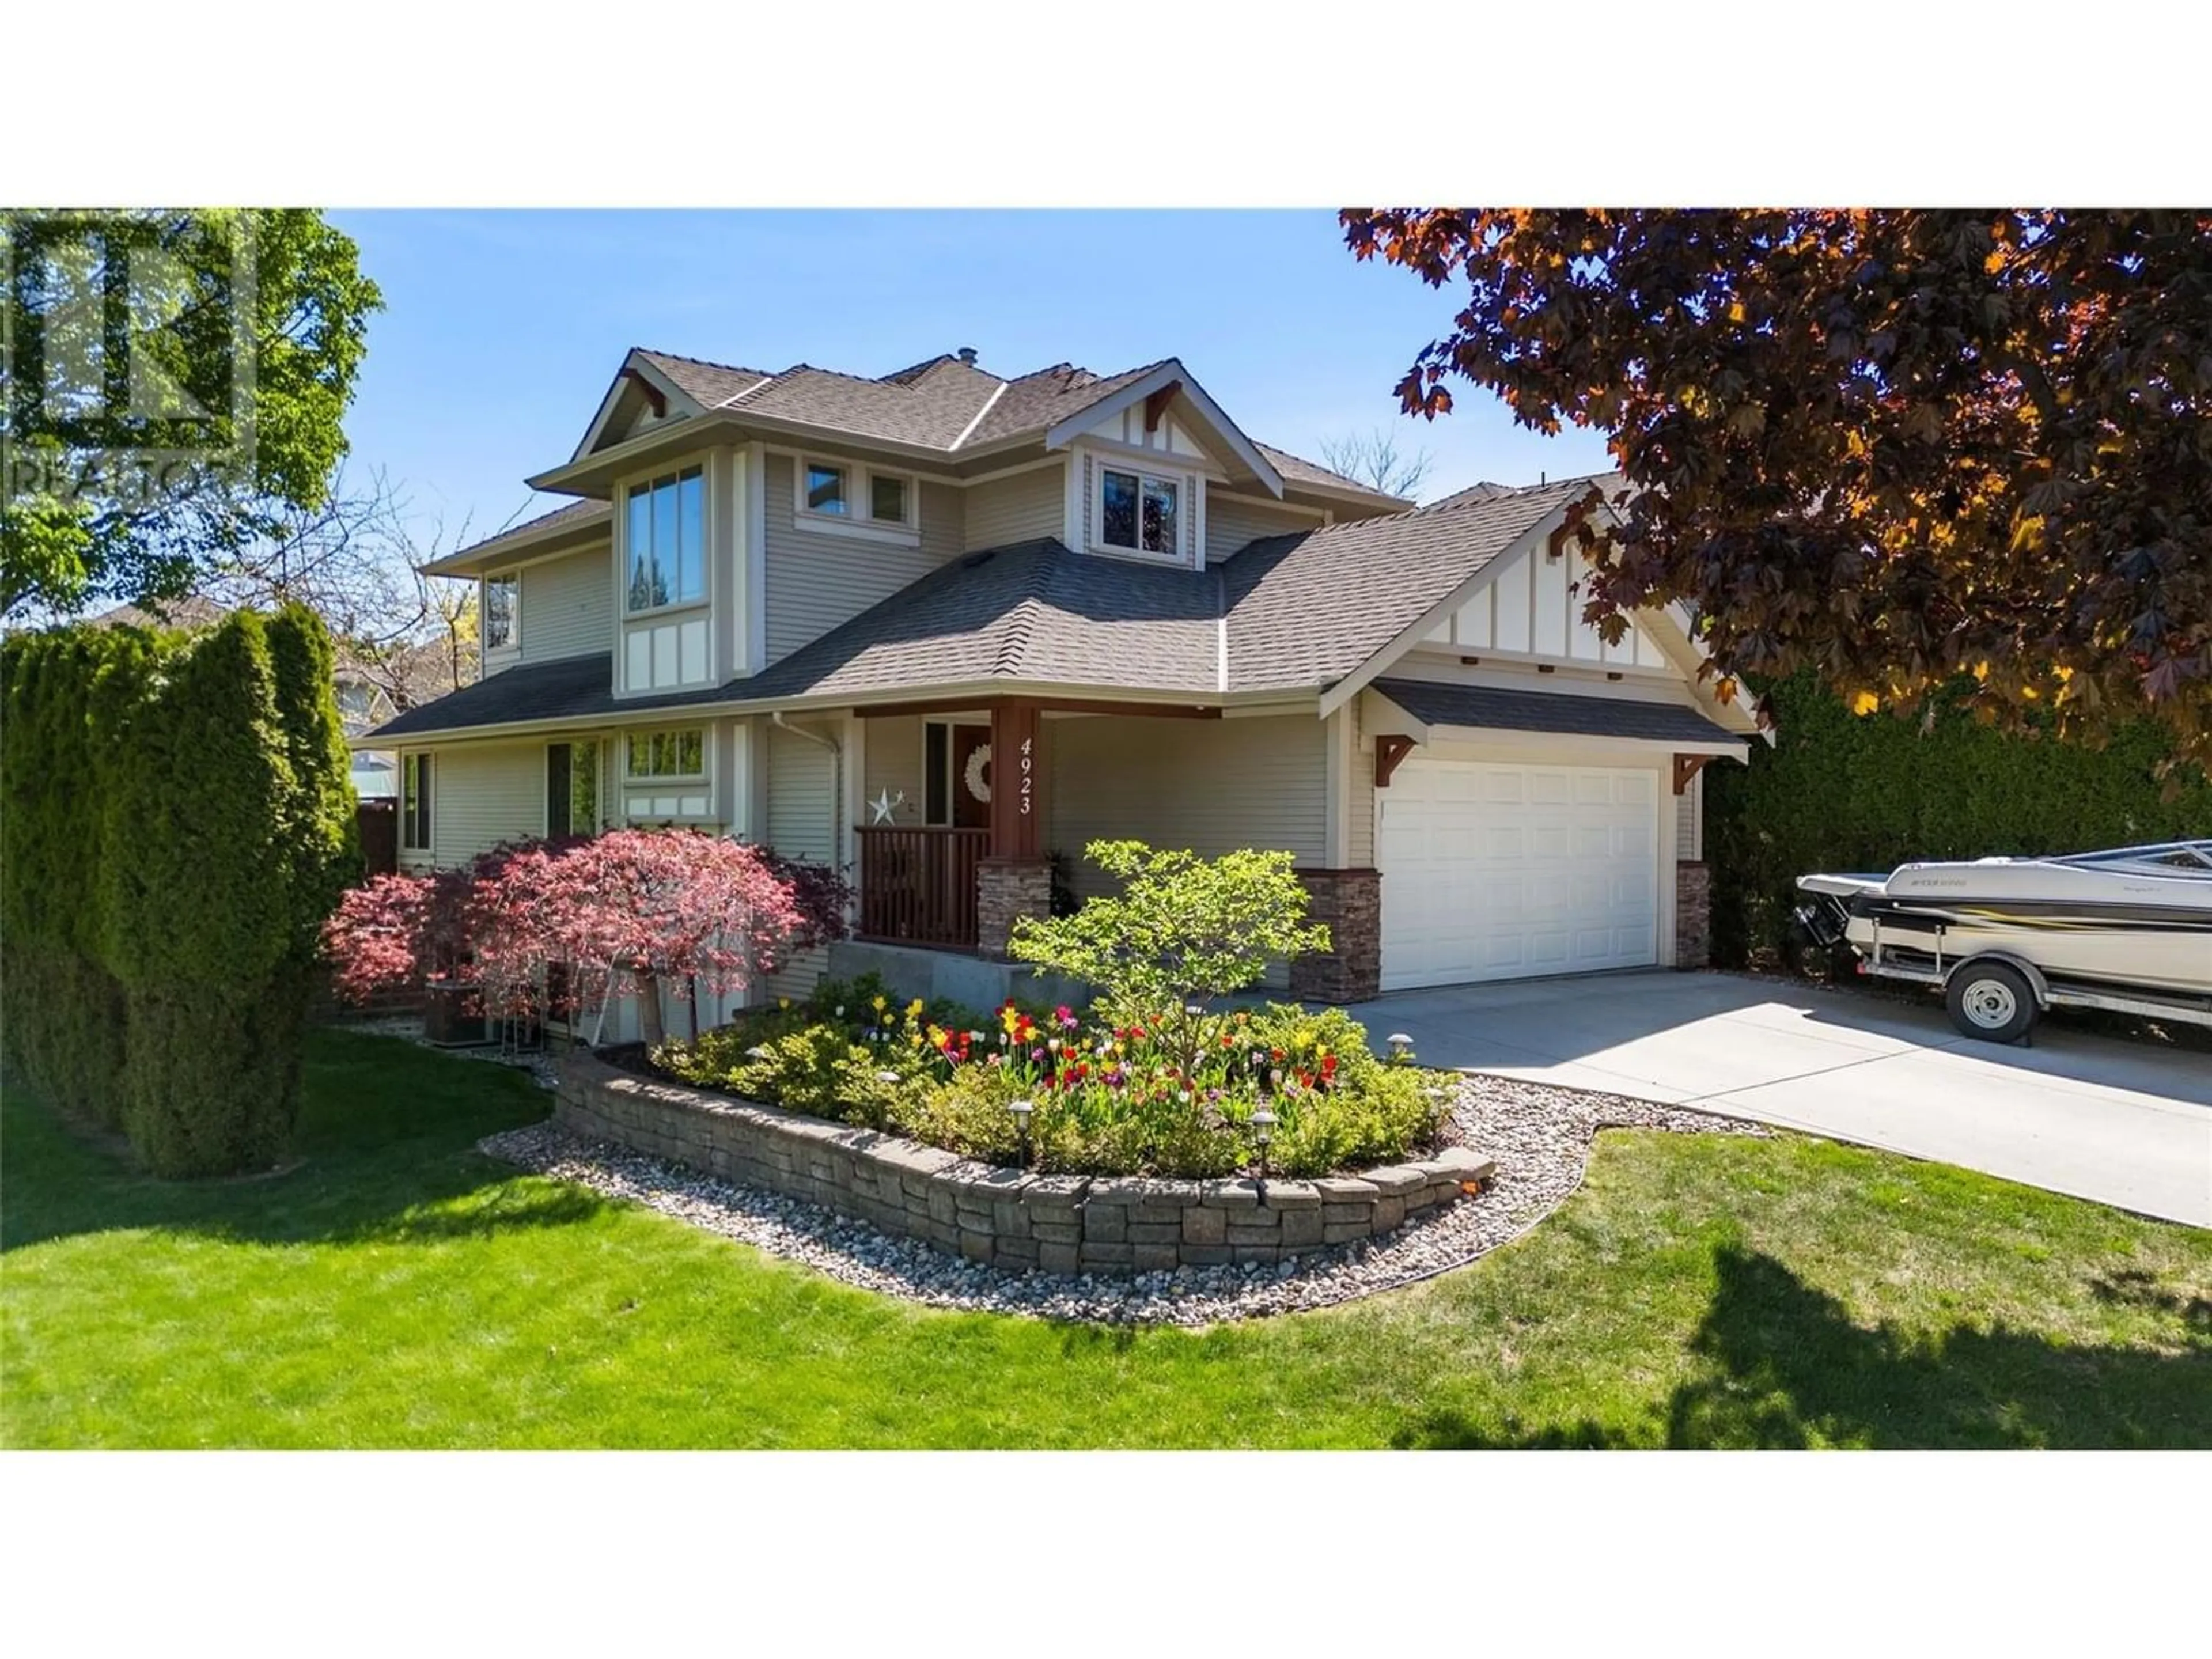 Frontside or backside of a home for 4923 Haskins Court, Kelowna British Columbia V1W5B5